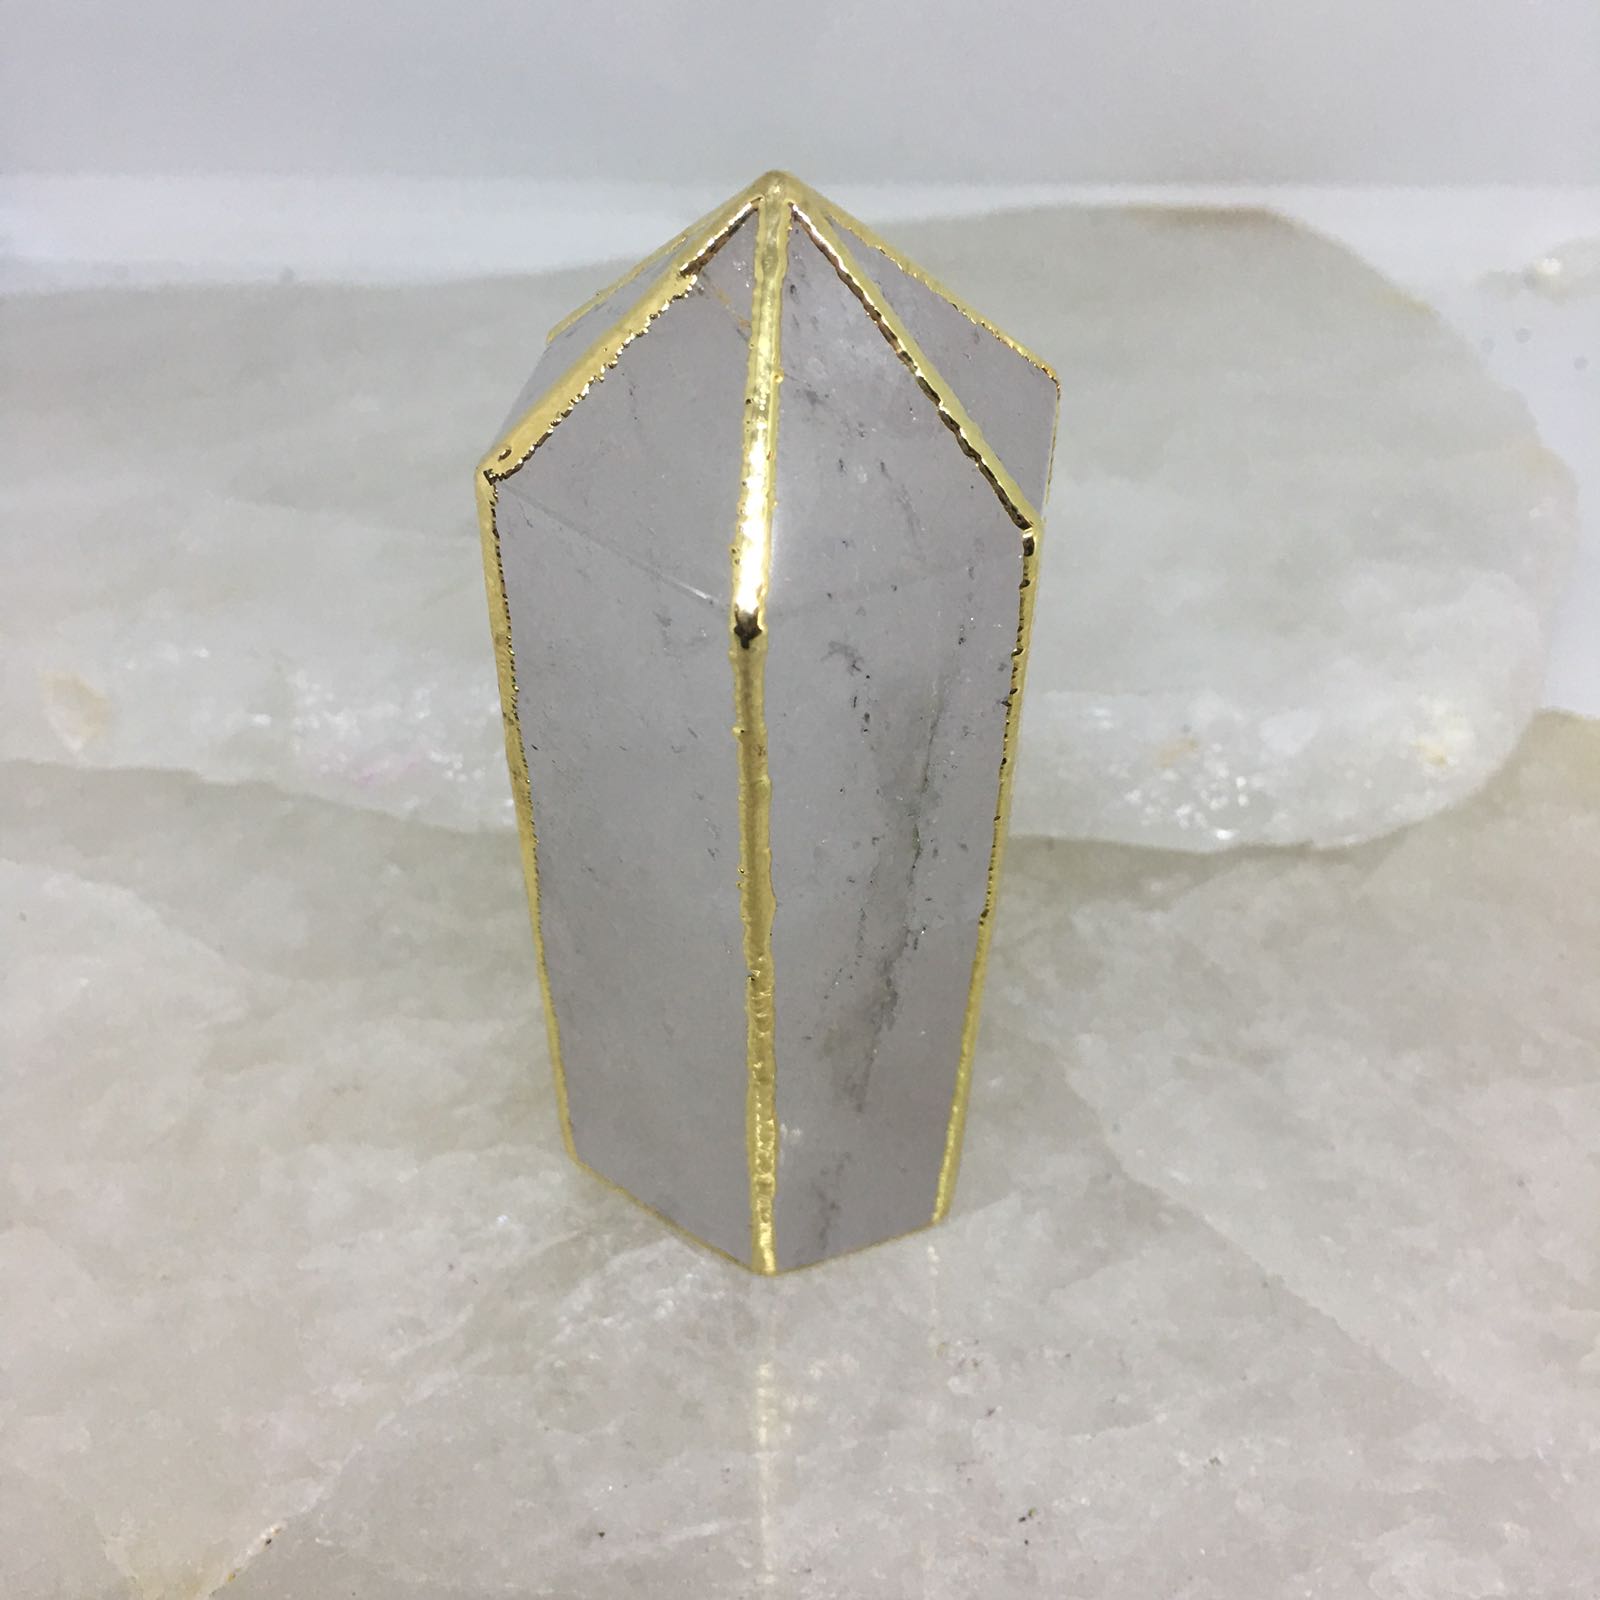 Stones from Uruguay - Gold Plated Clear Quartz Point for Decor & Gift